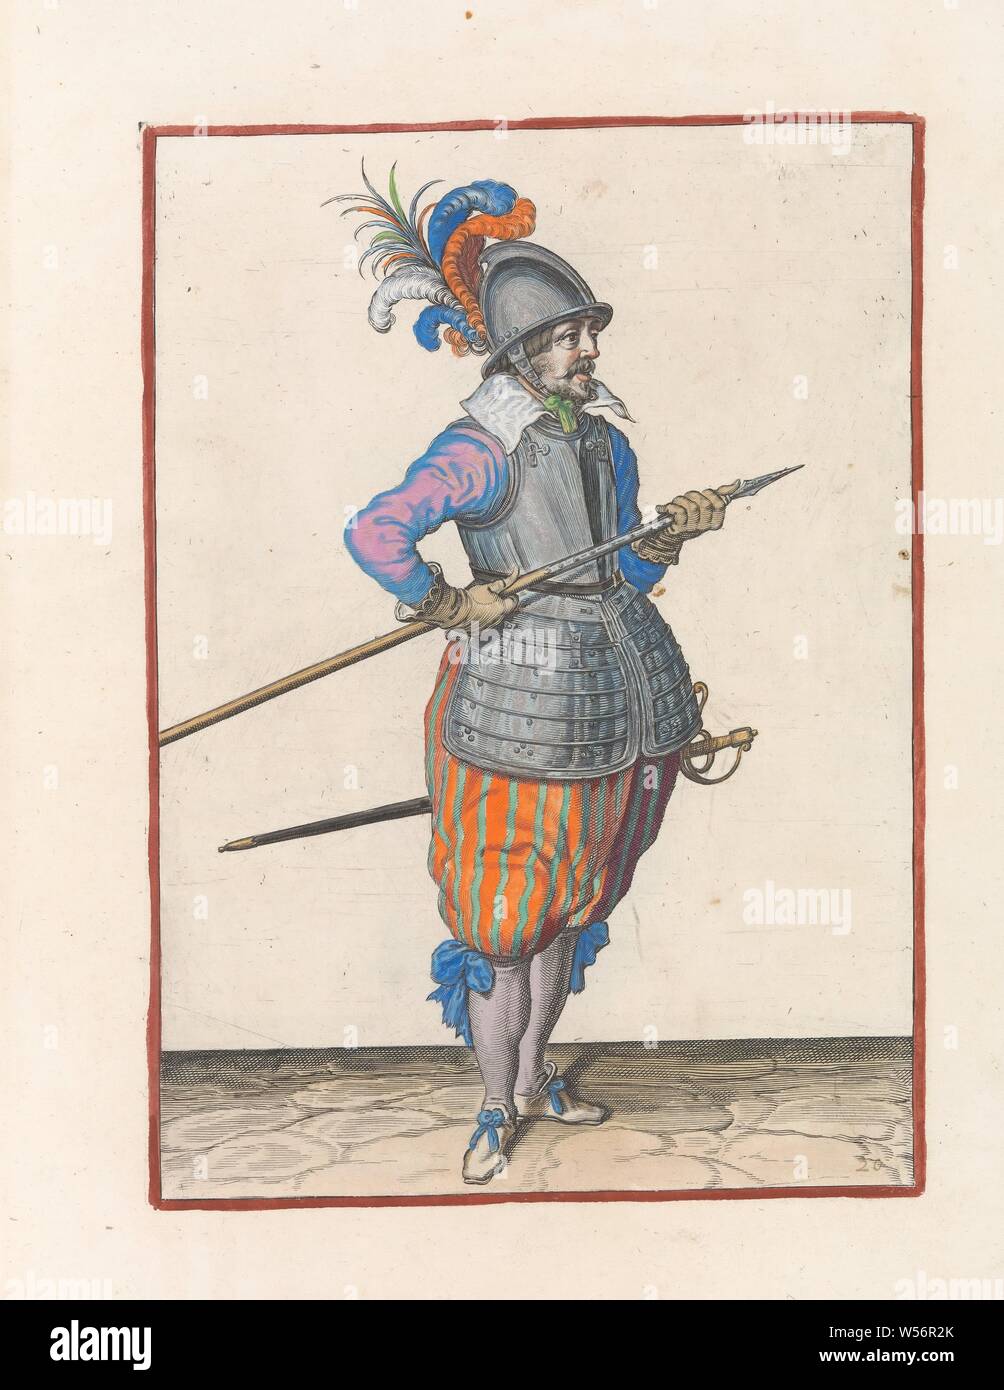 Soldier carrying his skewer with both hands on his right side, the point tilted up and close to his abdomen Corte lower body on the figuerliicke image acting of the Spies noodich is (original series title), A soldier, full-length, to the right, who carries his spear (lance) with both hands at his right side, the point tilted up and close to his belly. This print is part of the series of 32 hand-numbered prints of skewers in the Arms Act, handling of weapons, military training, helved weapons, polearms (for striking, hacking, thrusting): lance, Jacob de Gheyn (II) (workshop of), The Hague, c Stock Photo